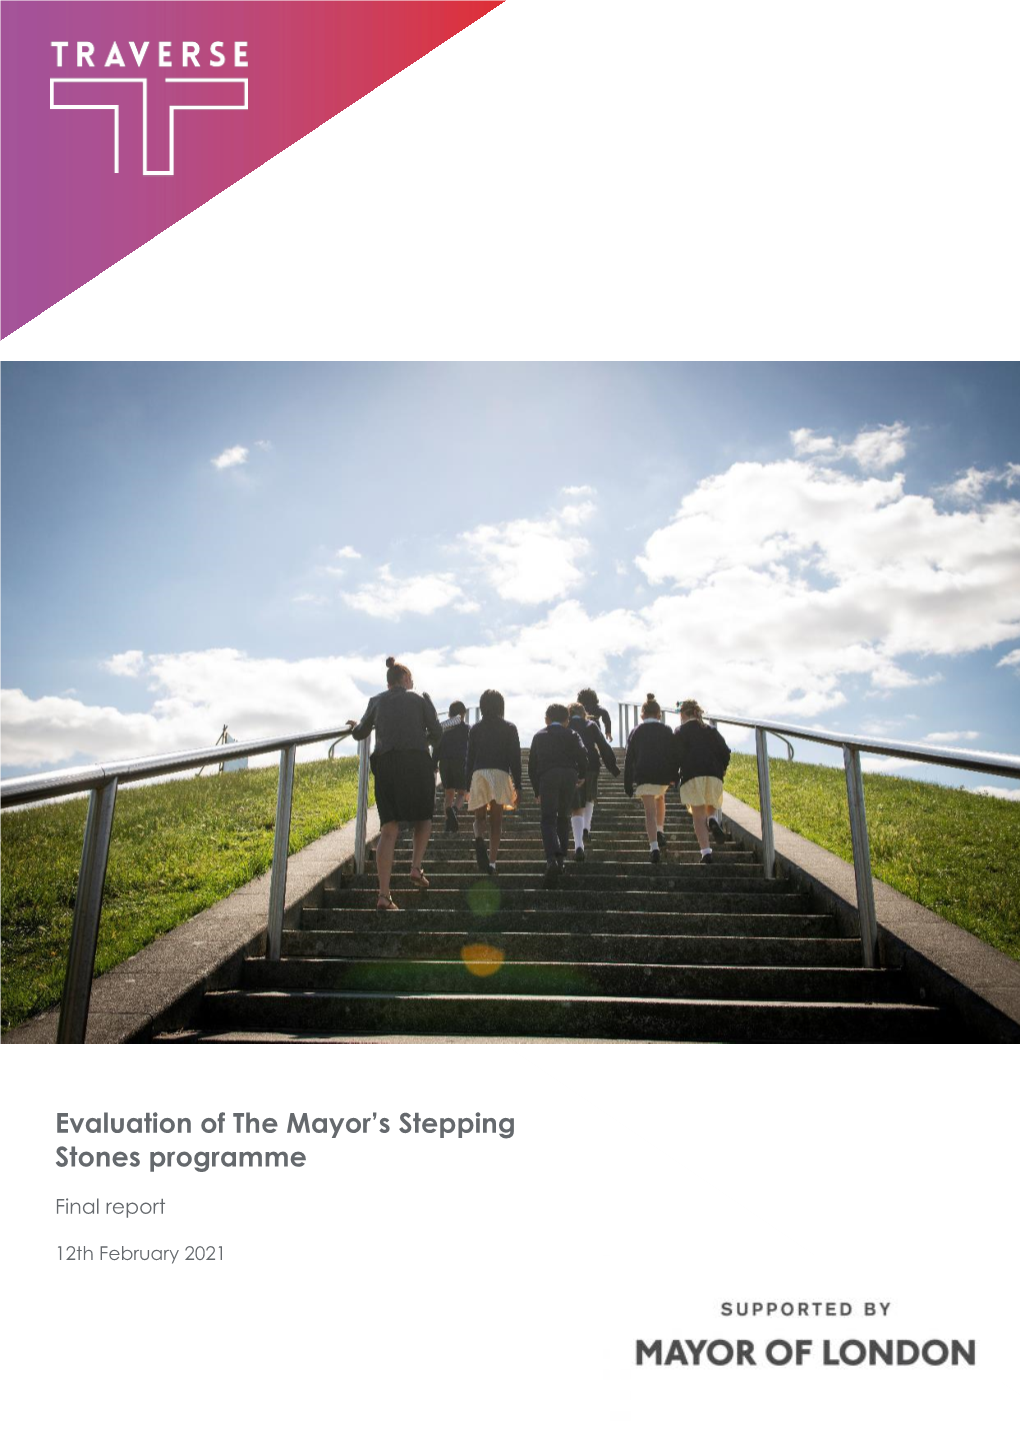 Evaluation of the Mayor's Stepping Stones Programme